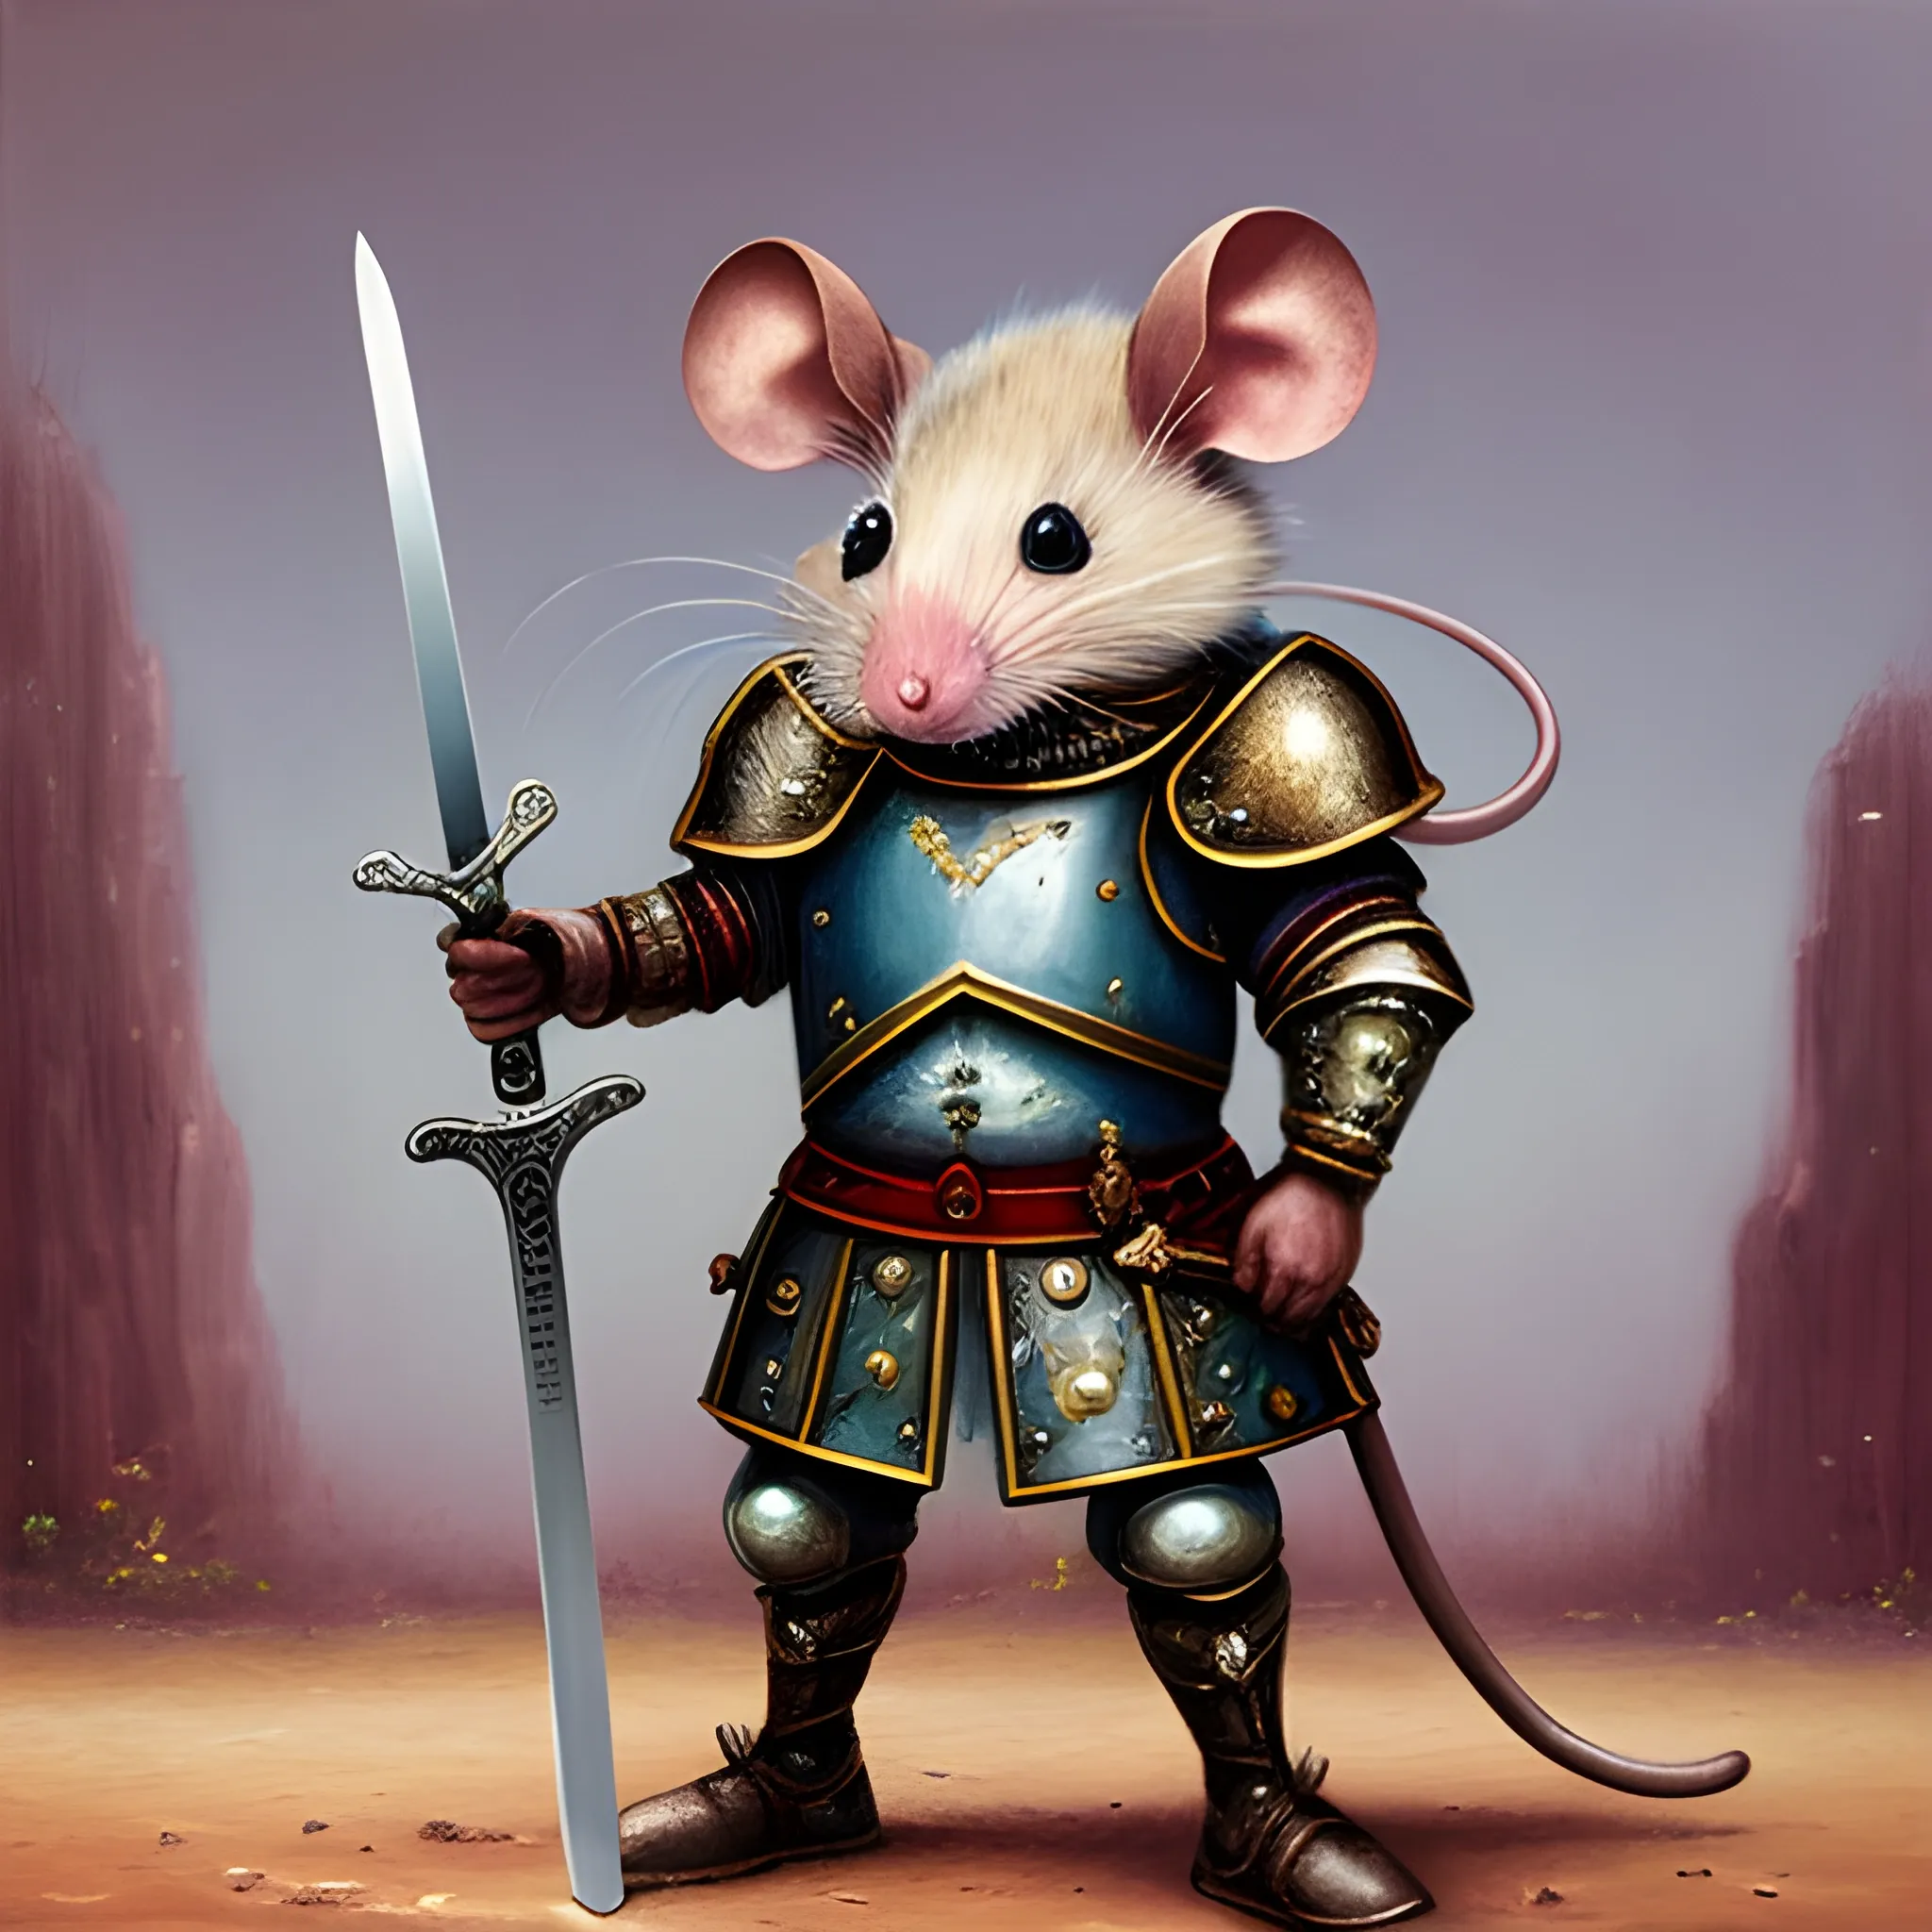 General Mouse is wearing armor. Holding a sword in hand, Oil Painting, Trippy